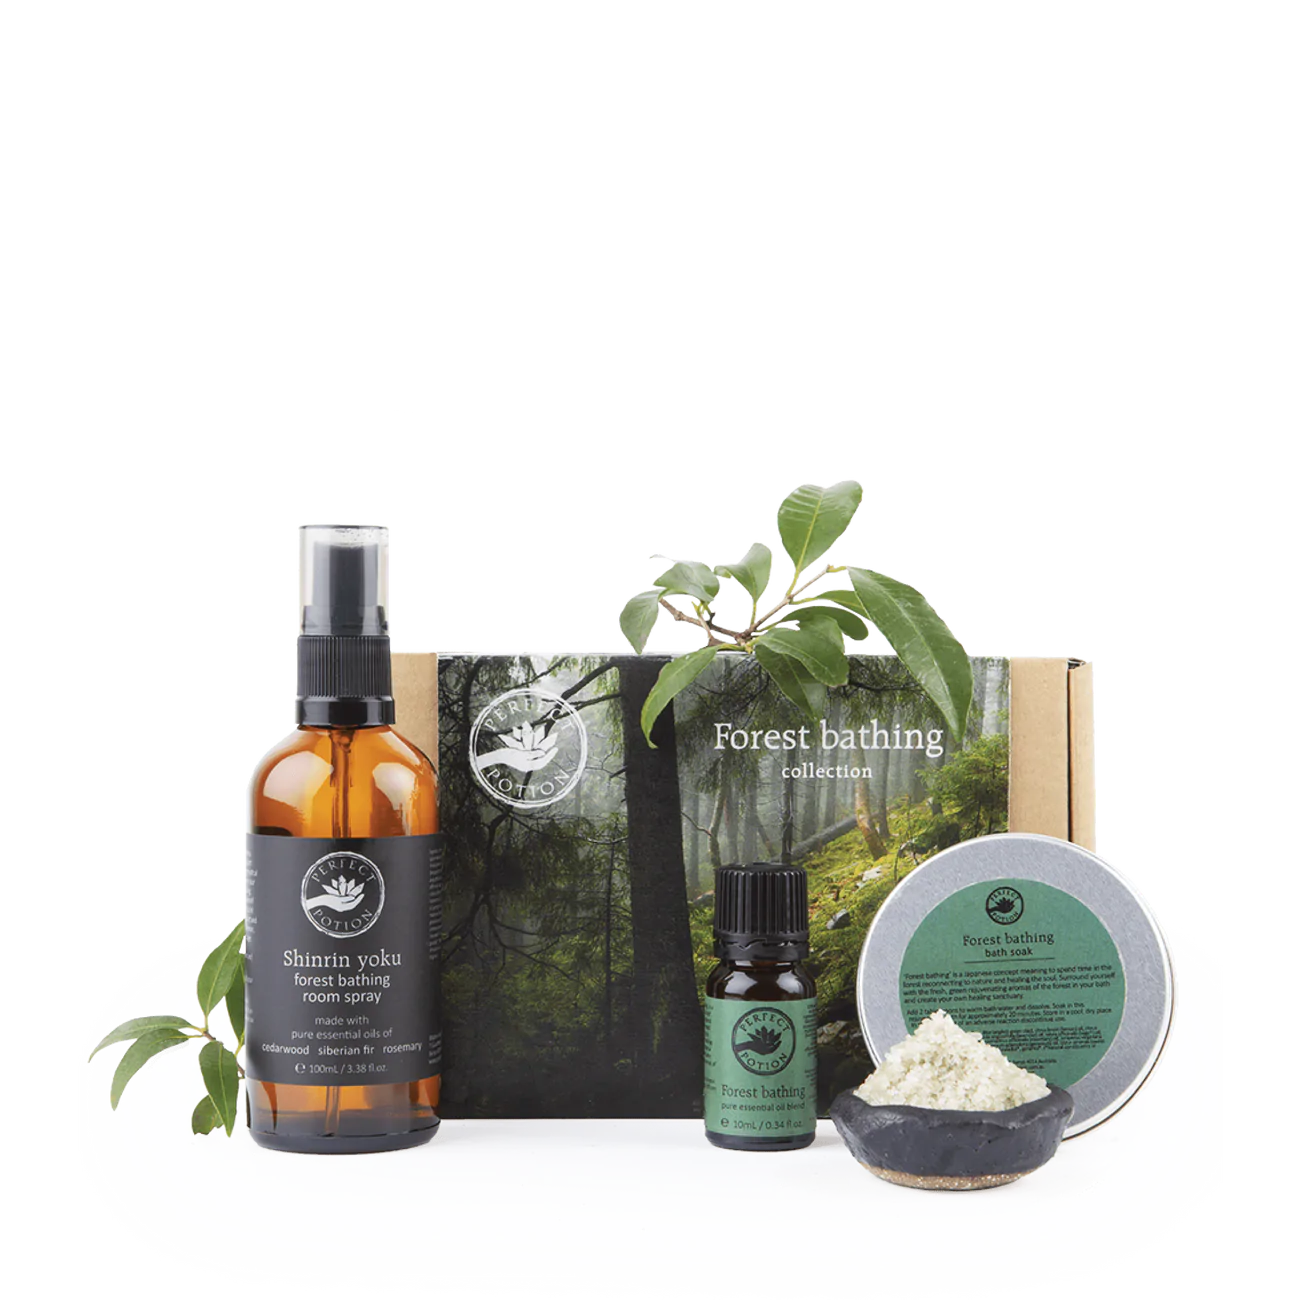 Perfect Potion Gift Packs